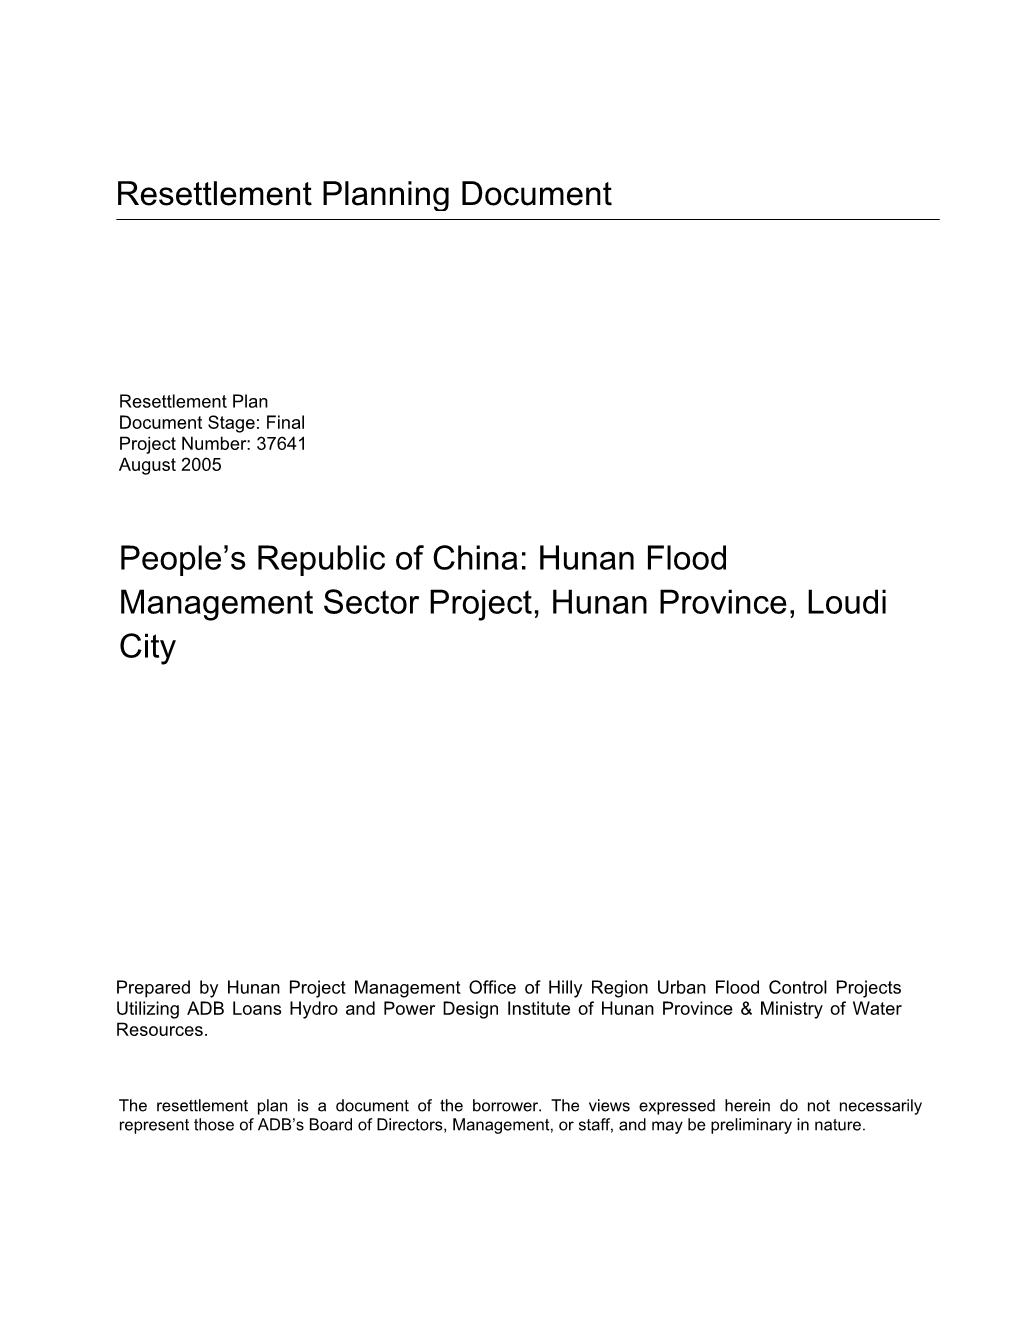 Resettlement Planning Document People's Republic of China